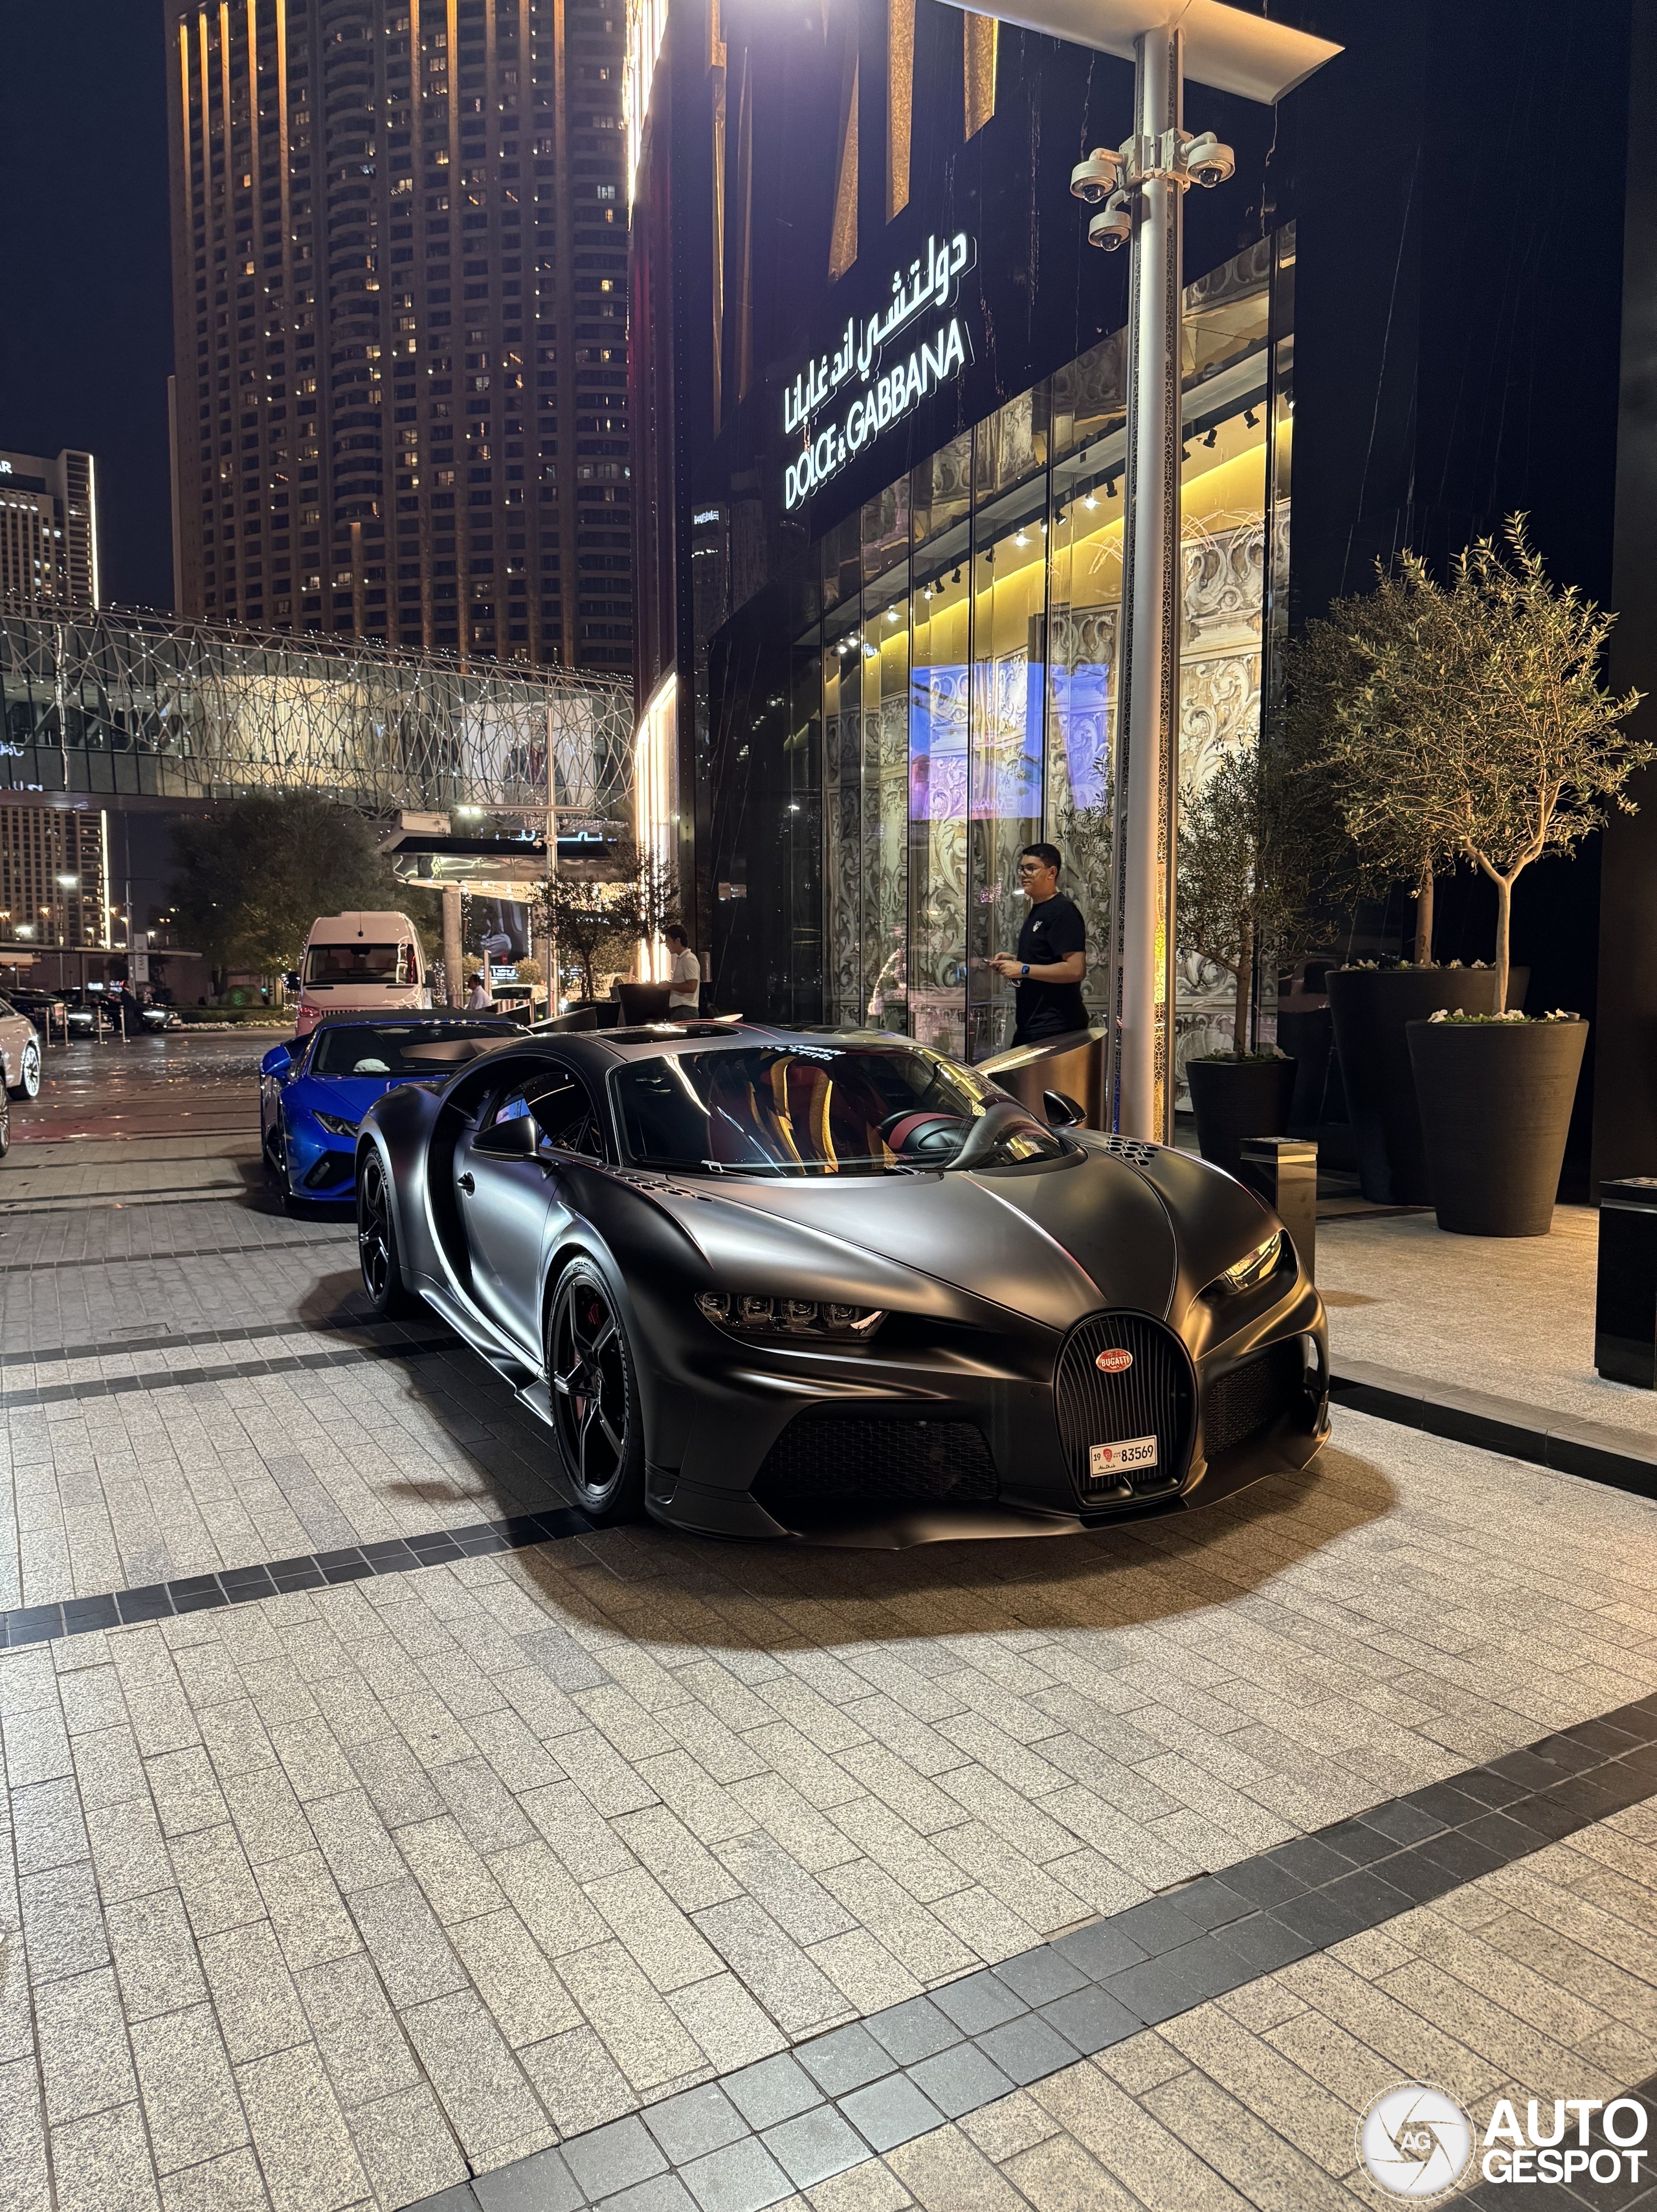 The Latest Trends in Exotic Car Spots